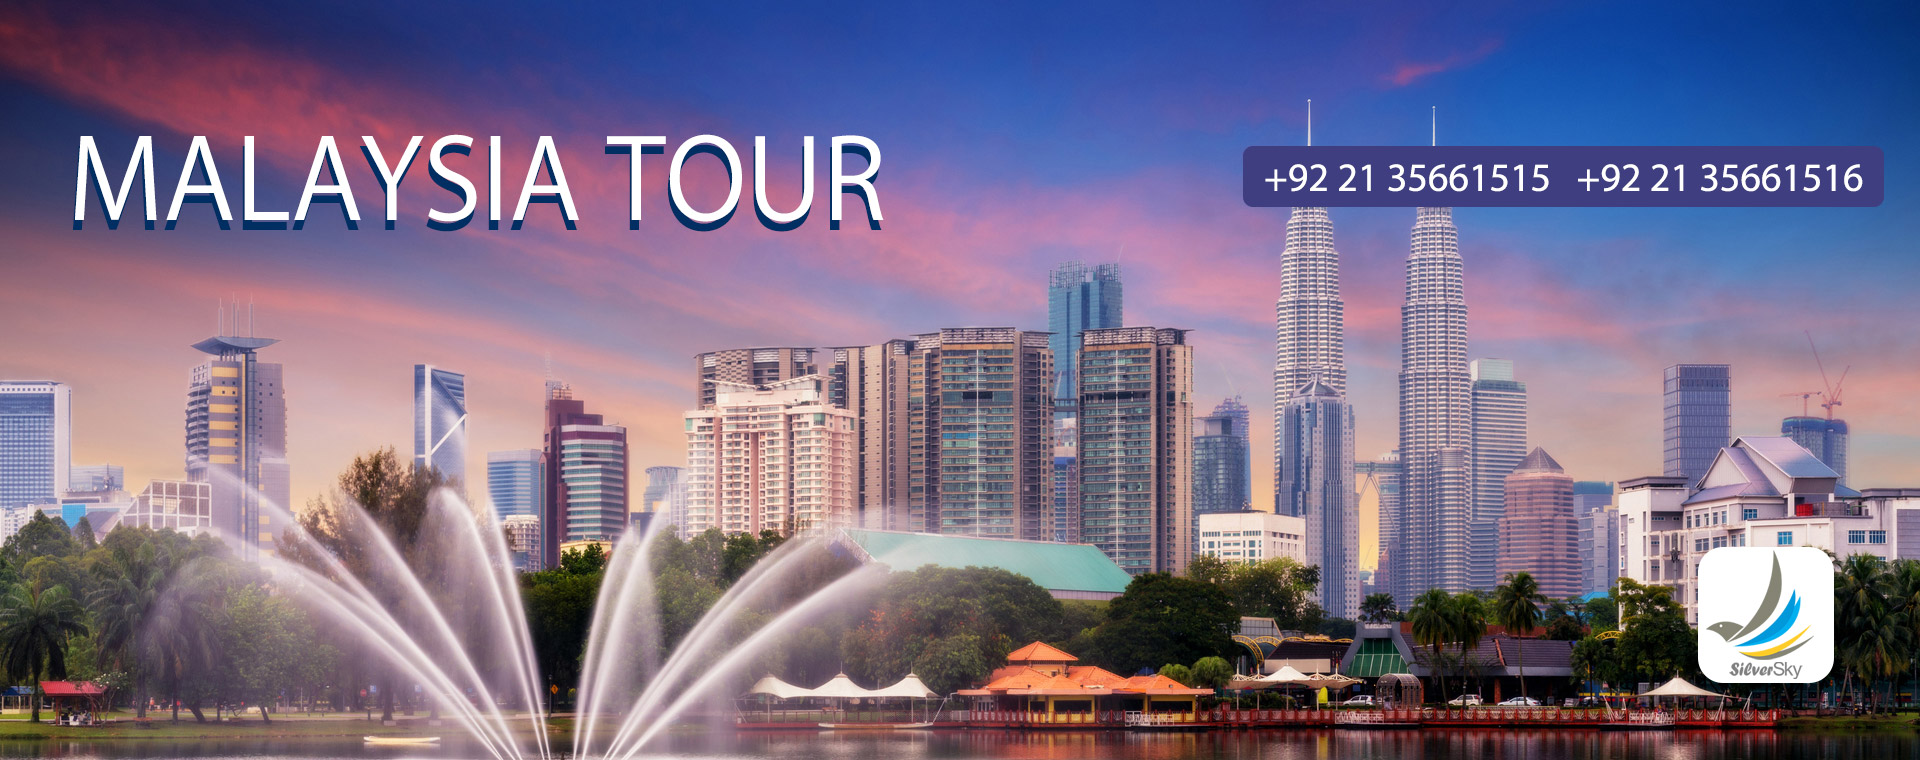 MALAYSIA Tour by SilverSky Travel and Tourism